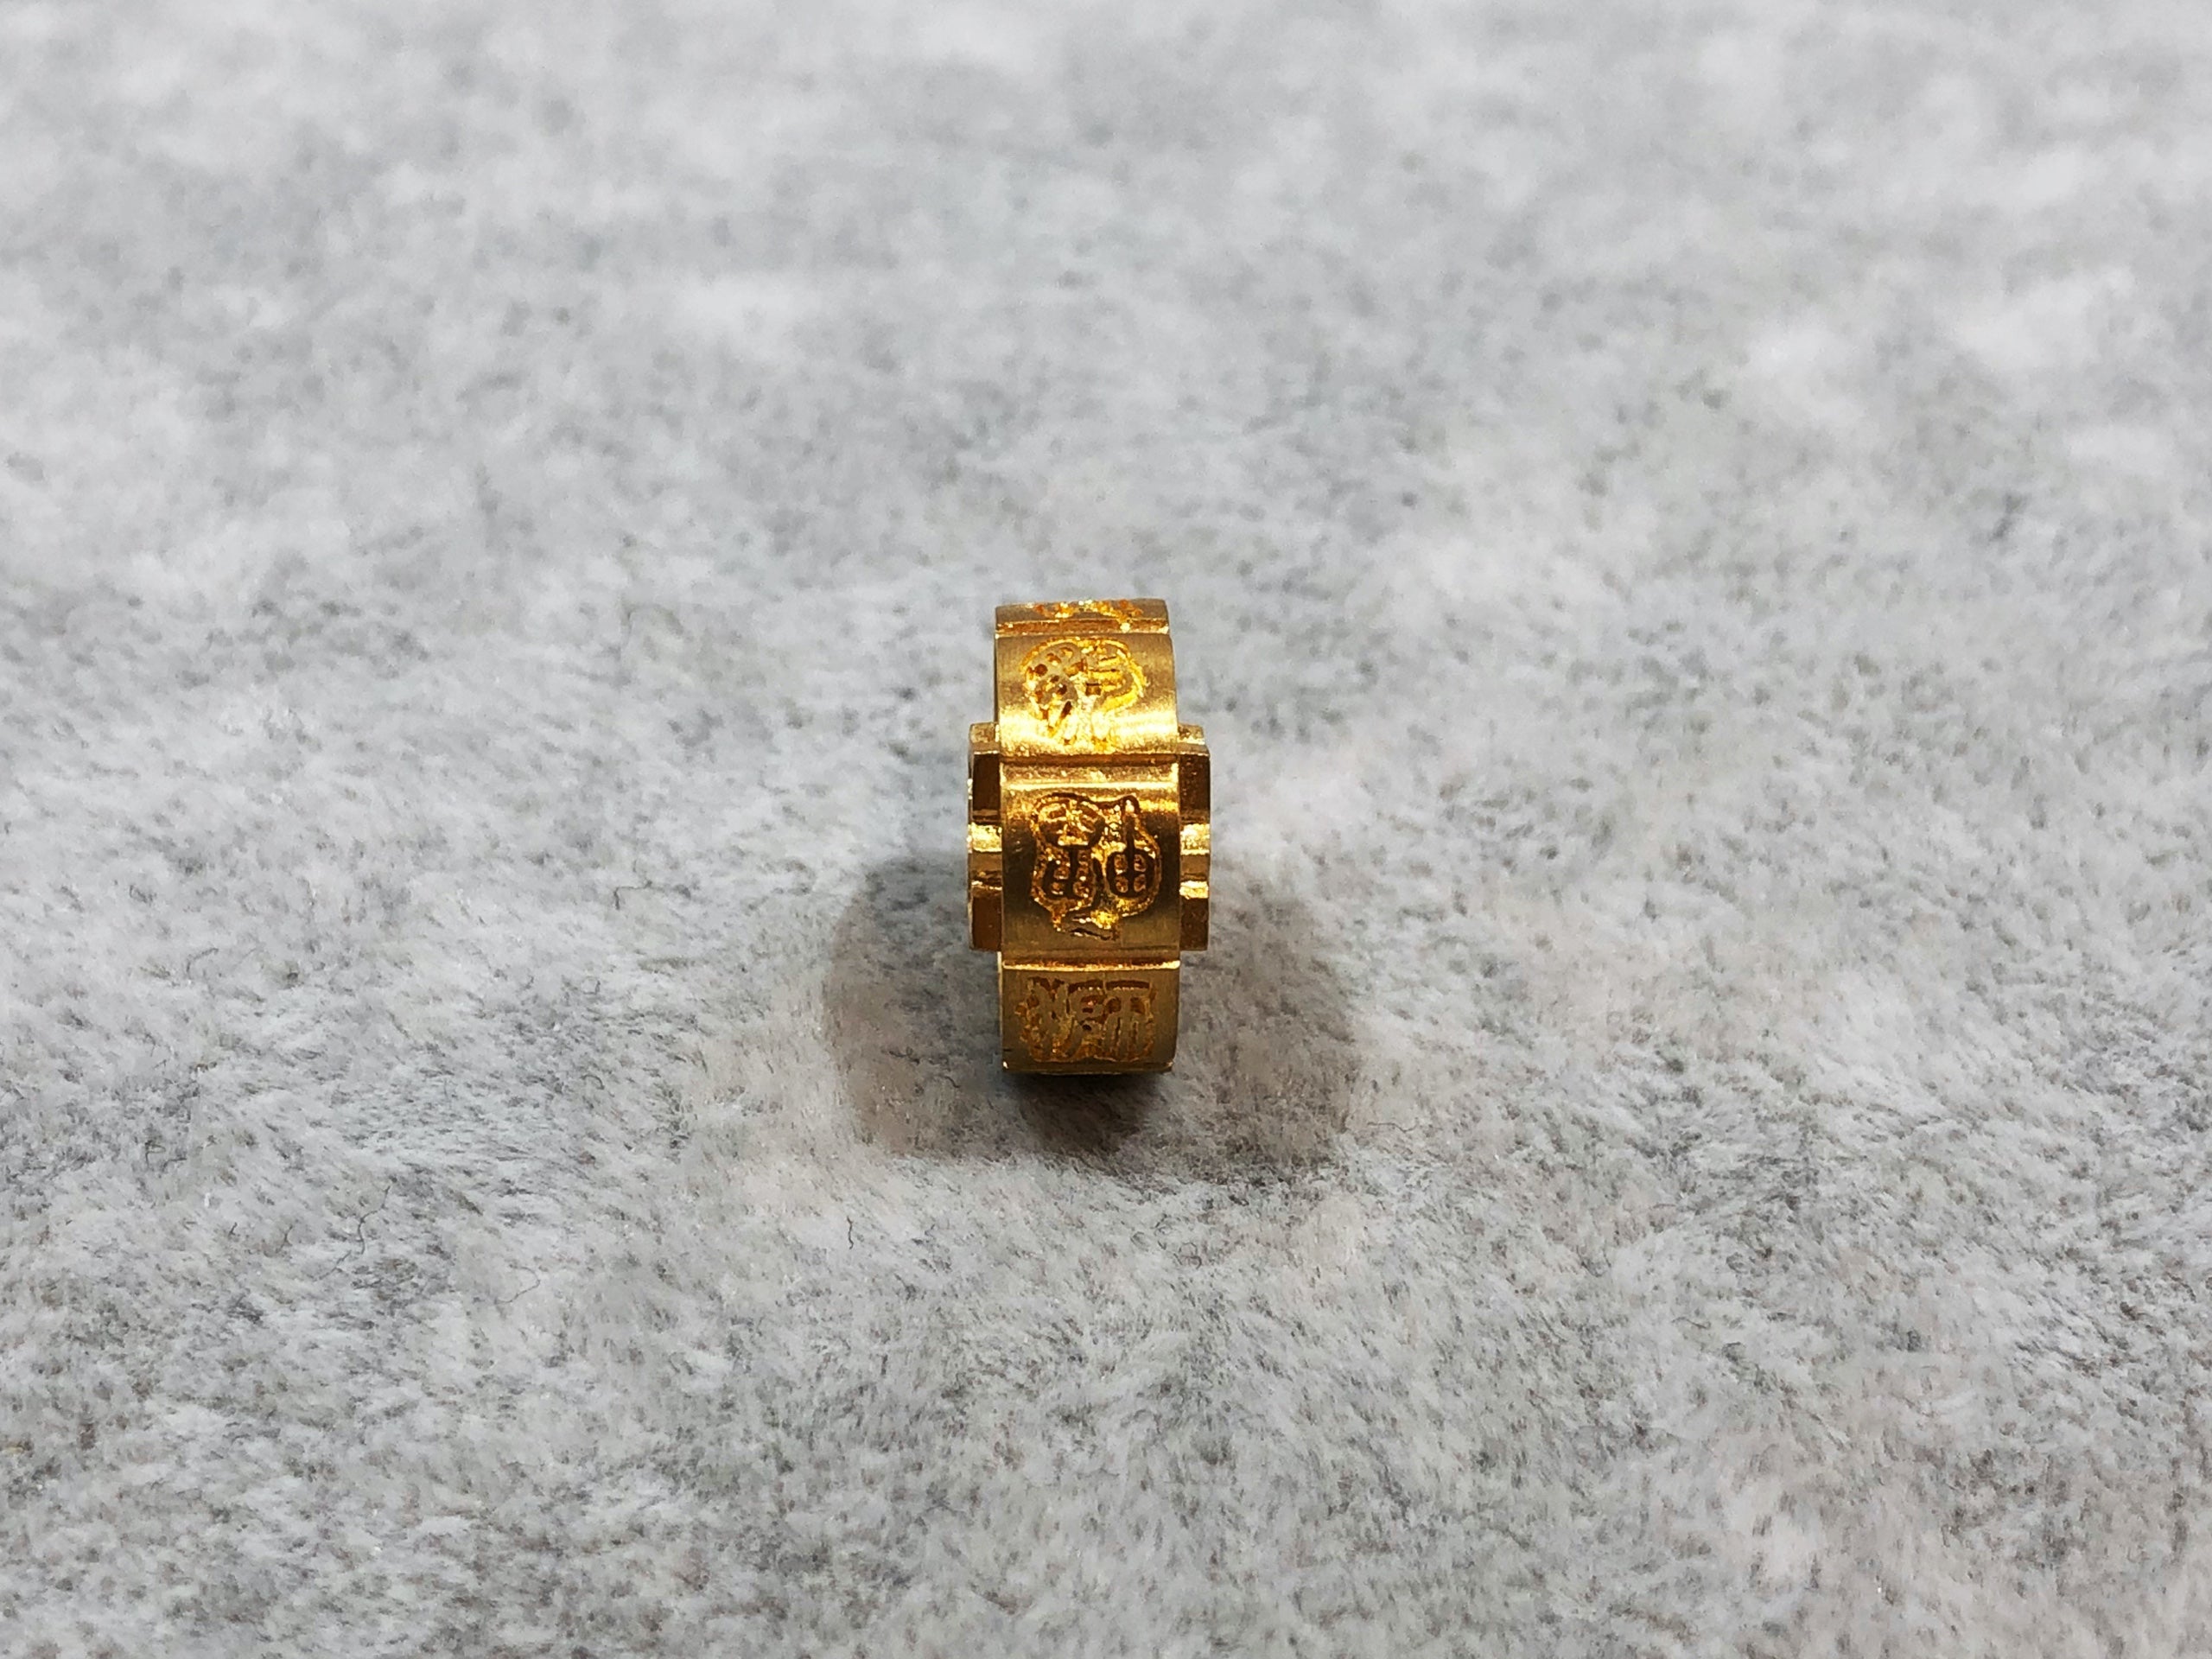 Cheers to great fortune in 2021 God of Roads Octagram Prayer Bead, 24K gold - 2021新年吉祥 路神八方平安珠 24K金款